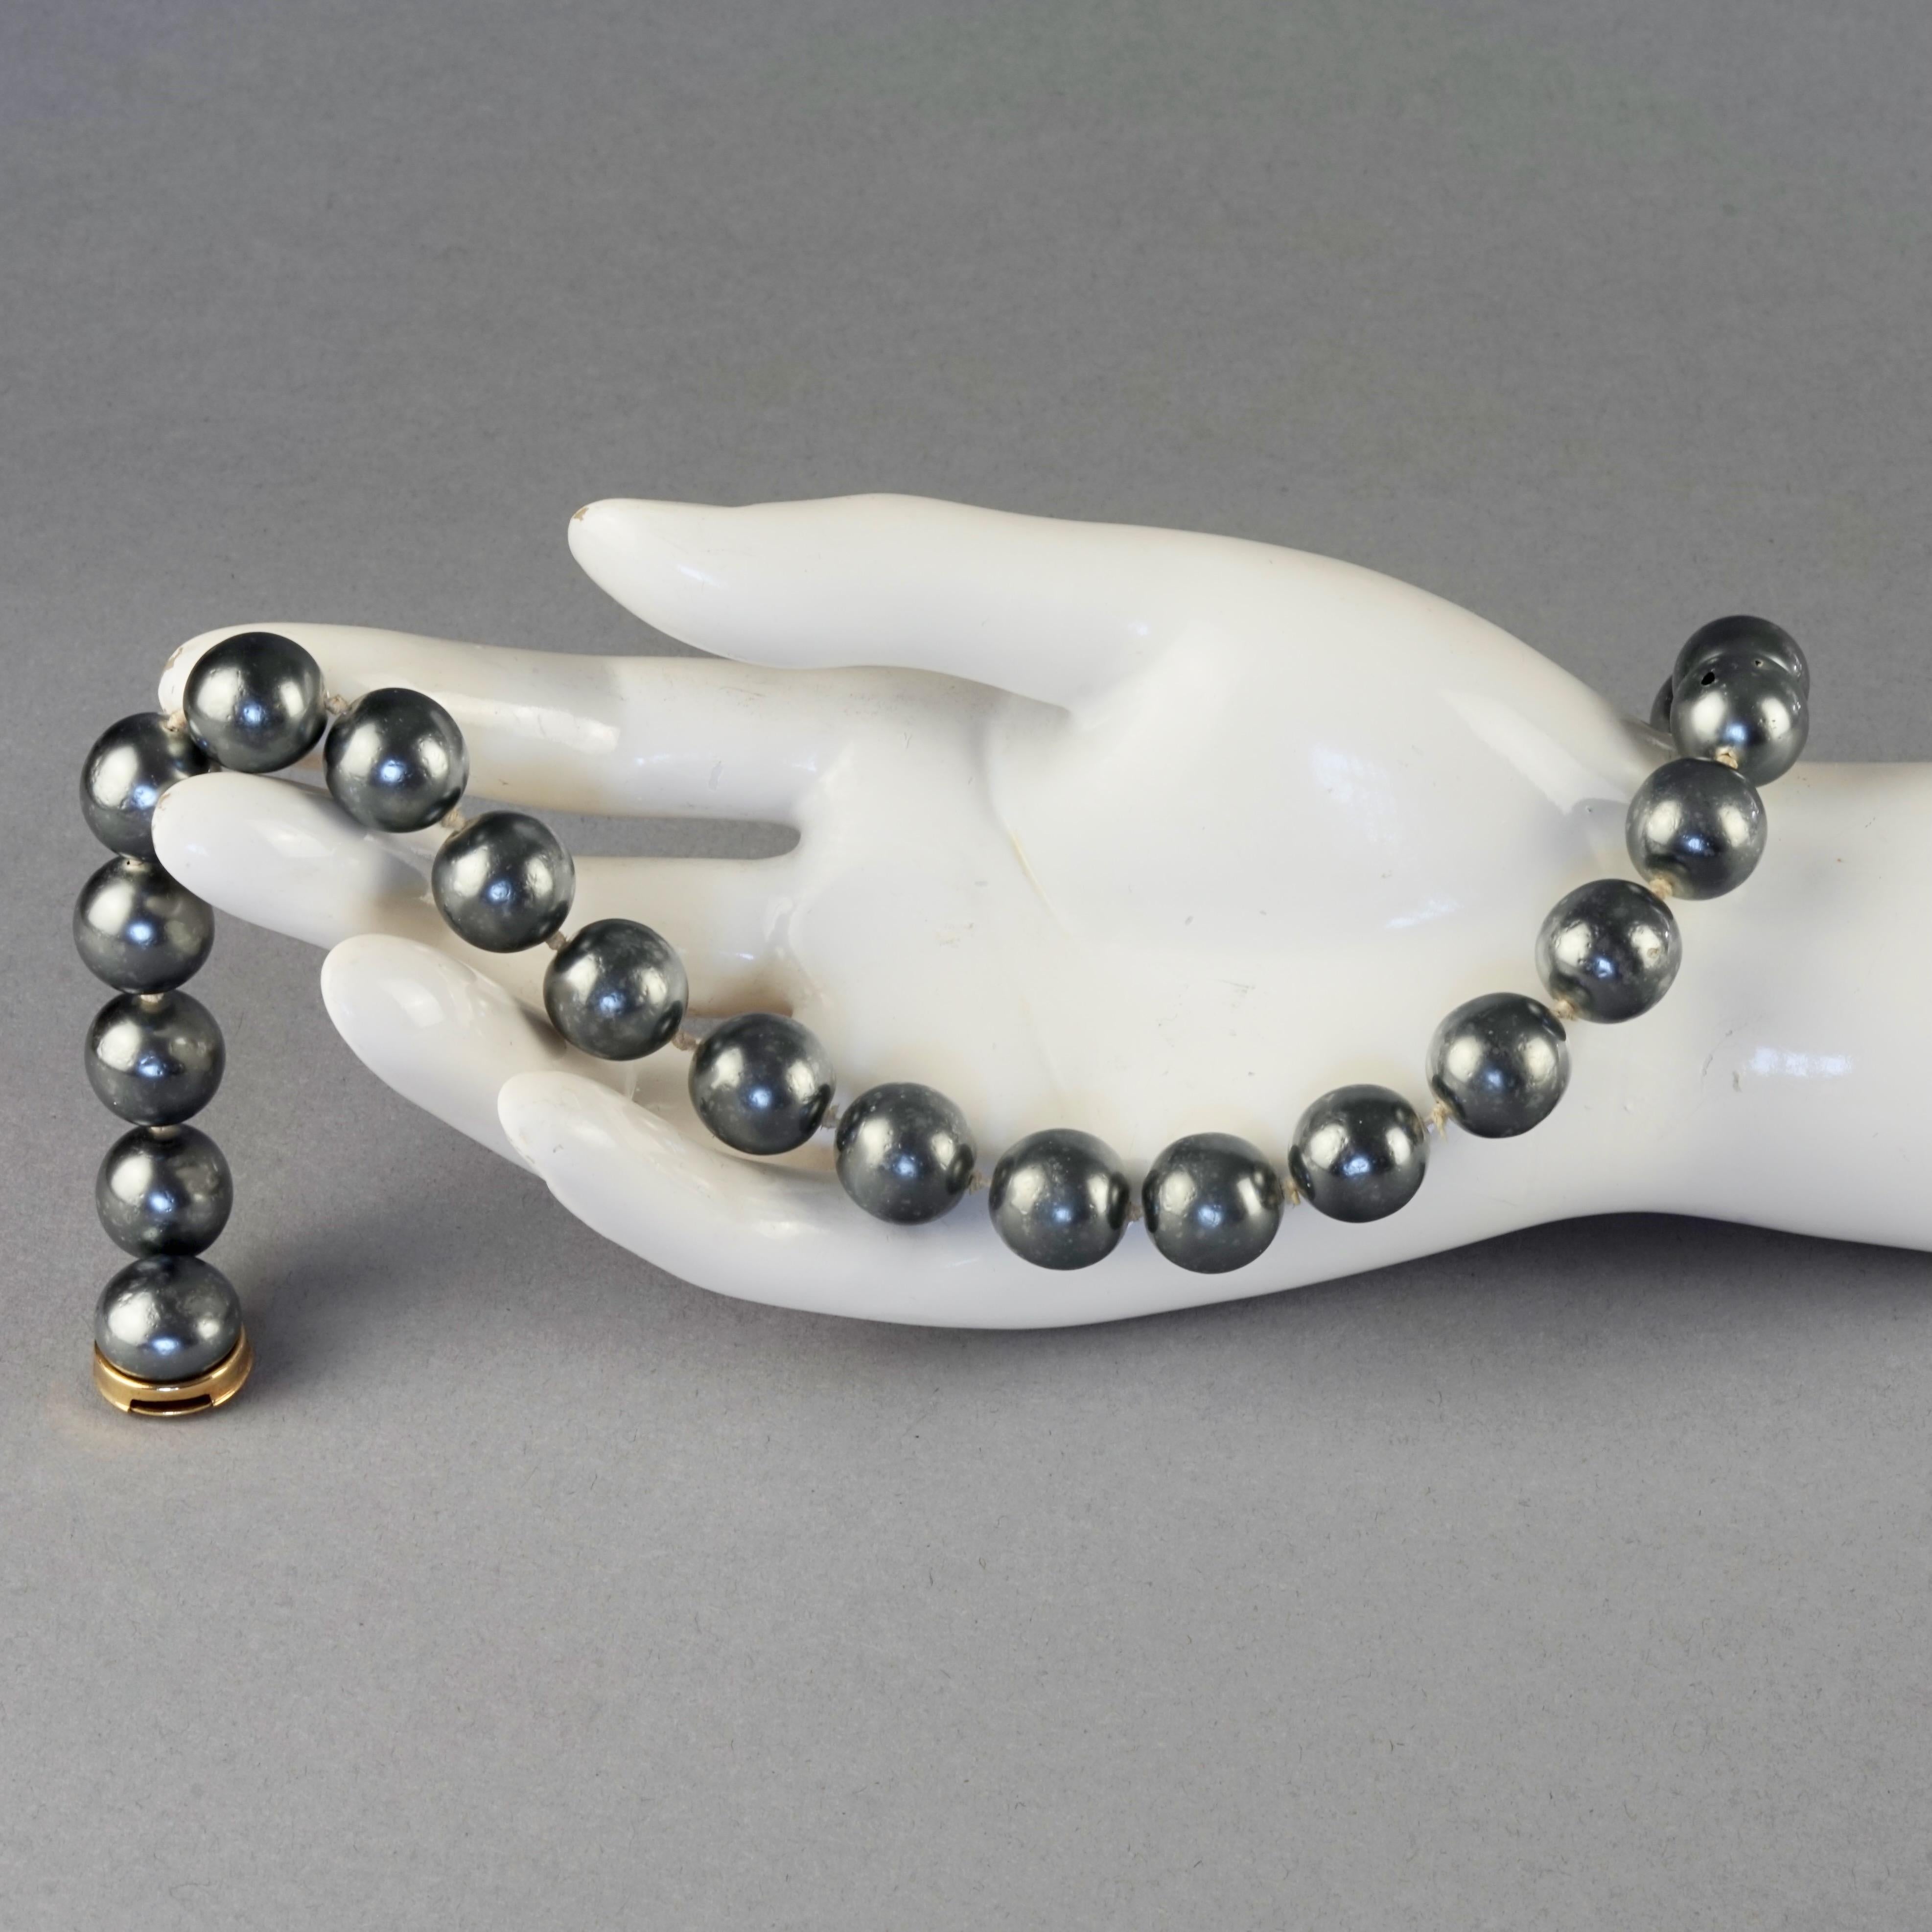 Vintage 1975 CHRISTIAN DIOR Silver Grey Glass Pearl Necklace For Sale 3